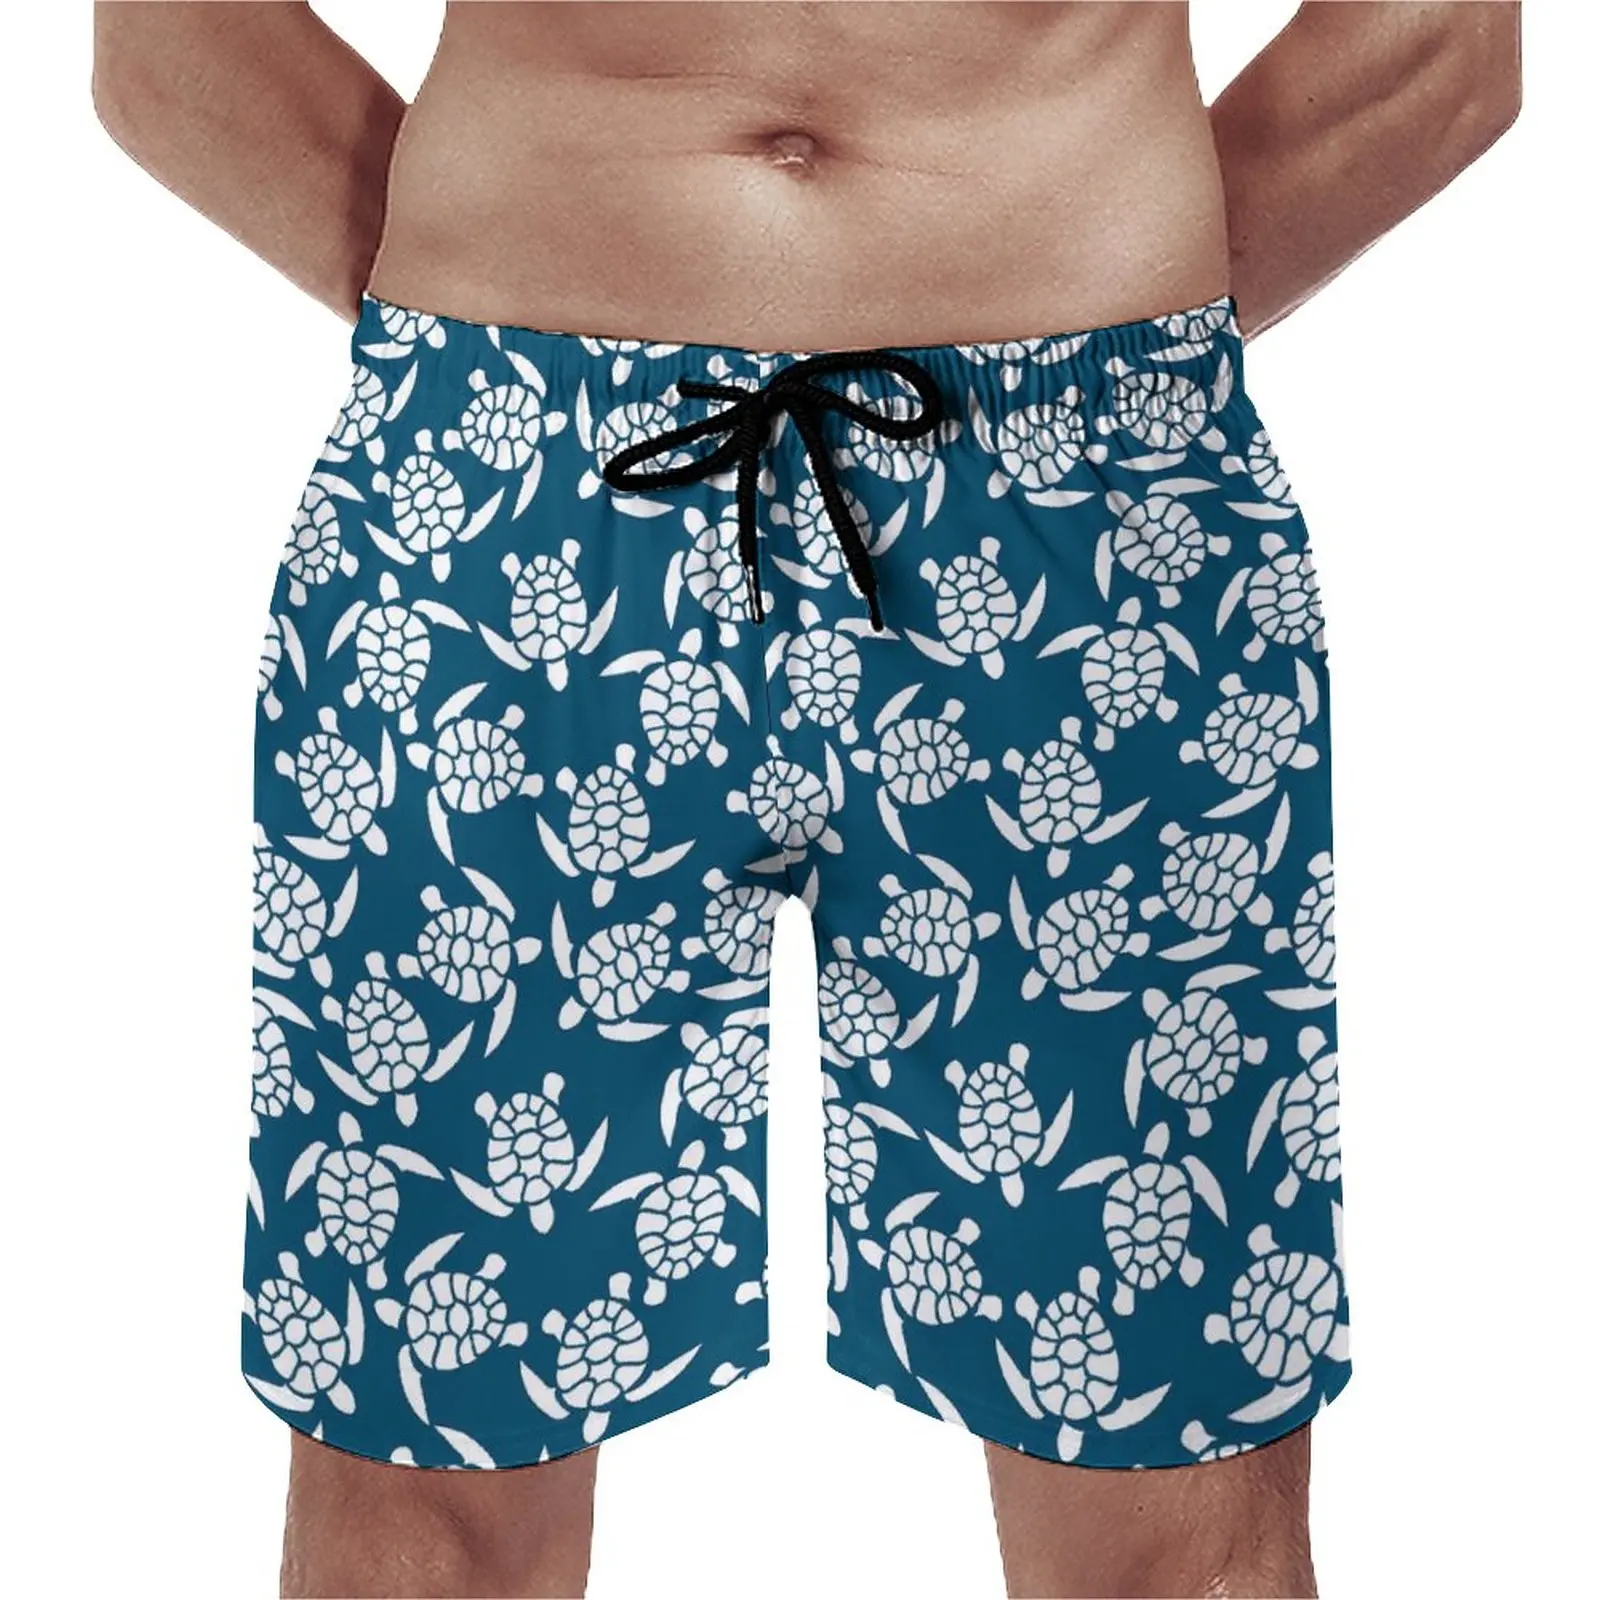 

Board Shorts Cute Turtles Casual Swim Trunks White and Blue Man Quick Dry Sports Fitness Hot Sale Plus Size Beach Shorts